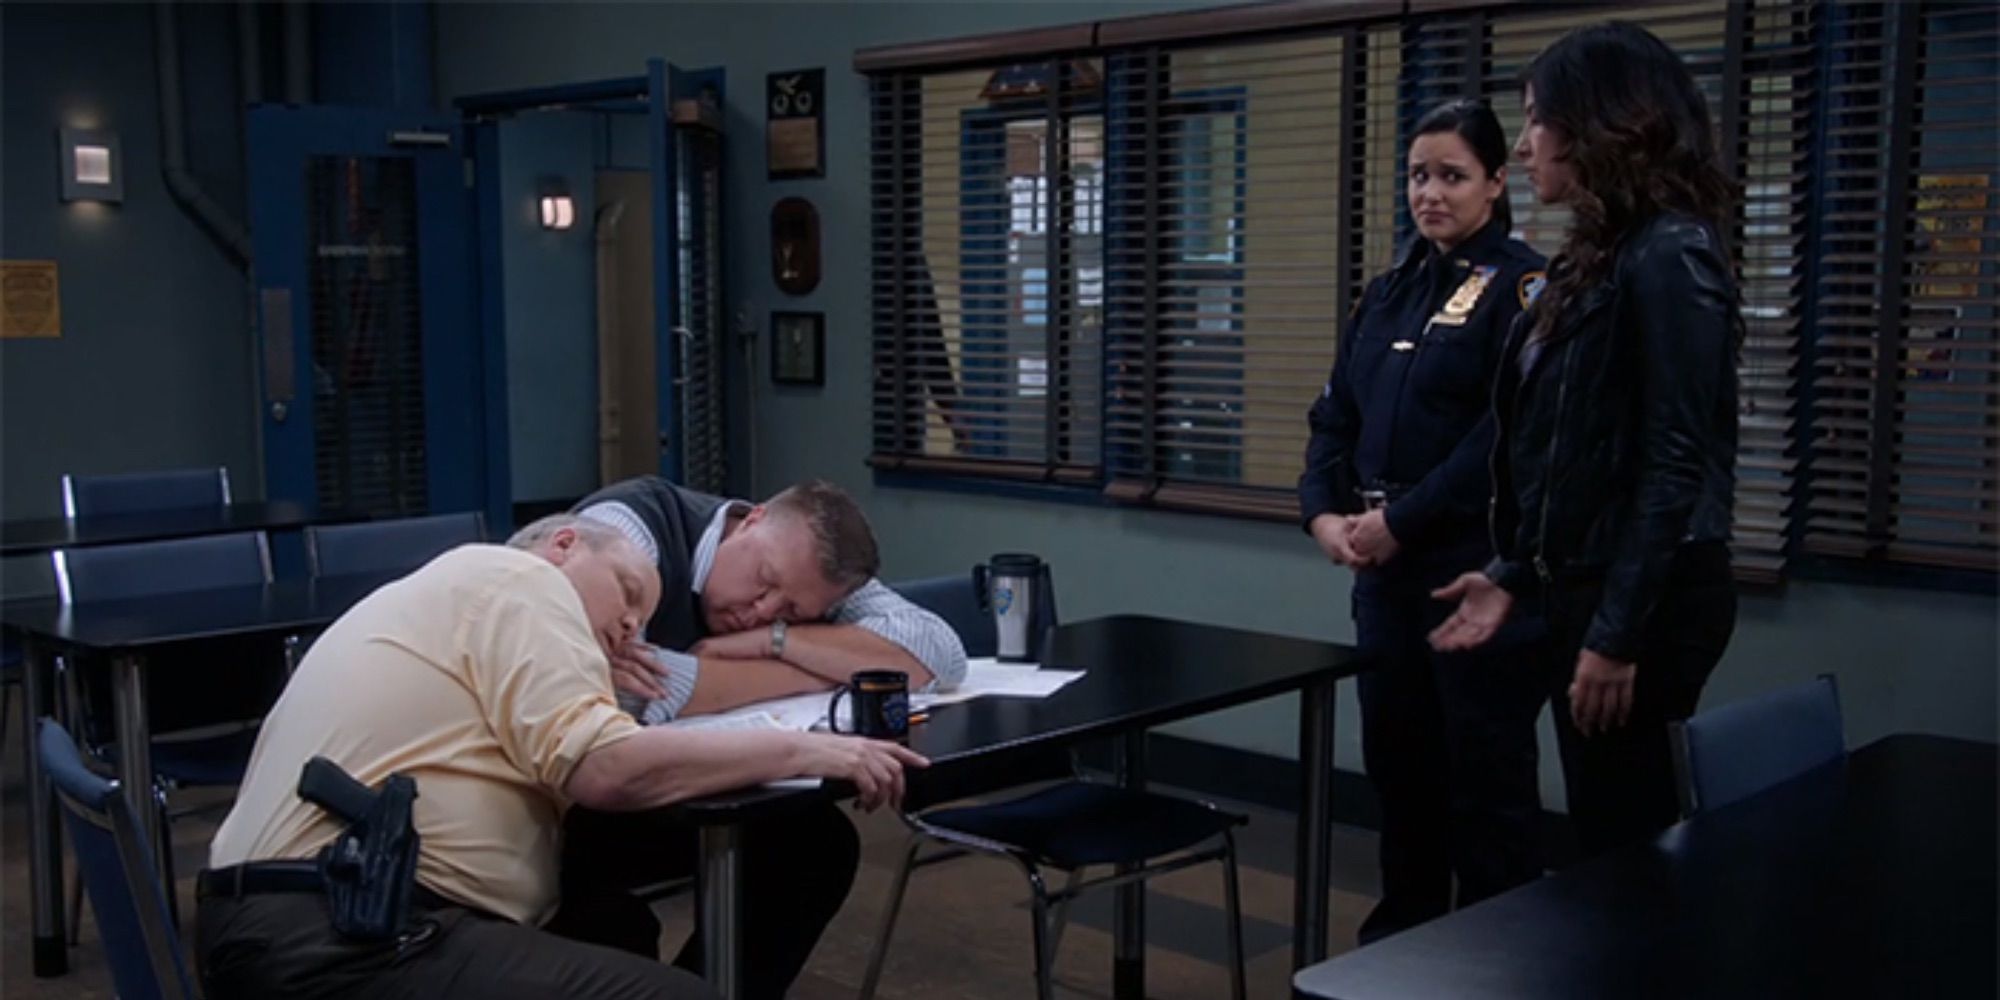 b99 Hitchcock and Scully sleeping